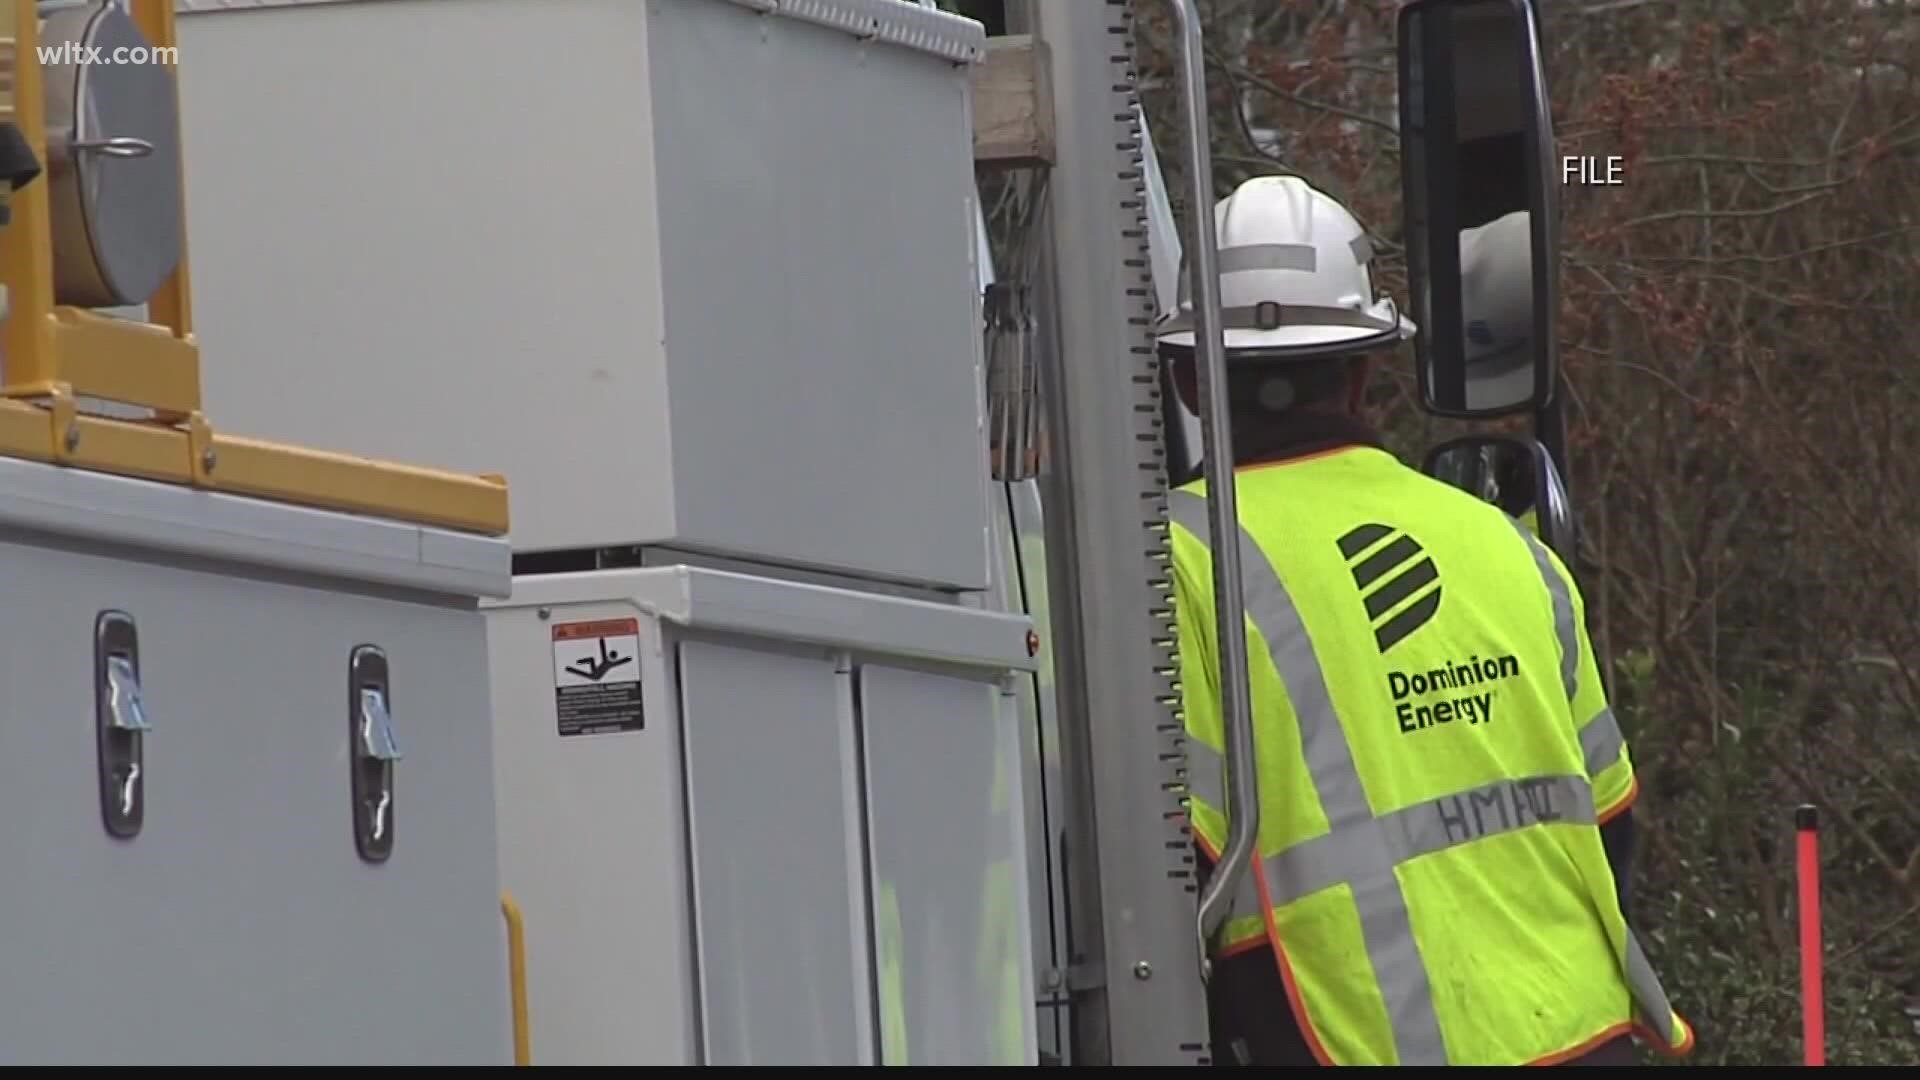 Dominion Energy South Carolina is asking the State's Public Service Commission to approve a 13.97% increase to its electricity rate.